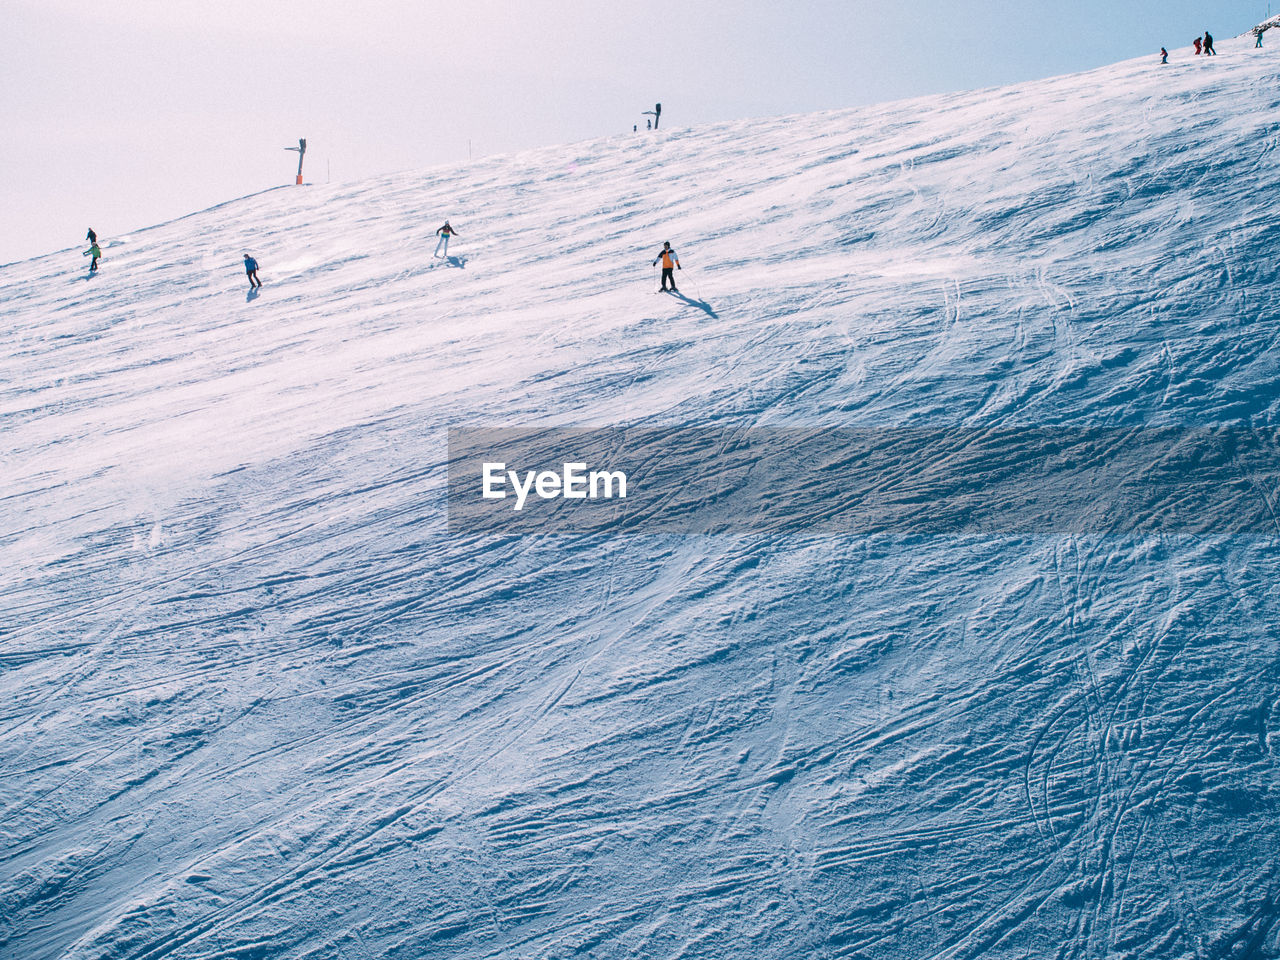 People skiing  on snow covered landscape against sky